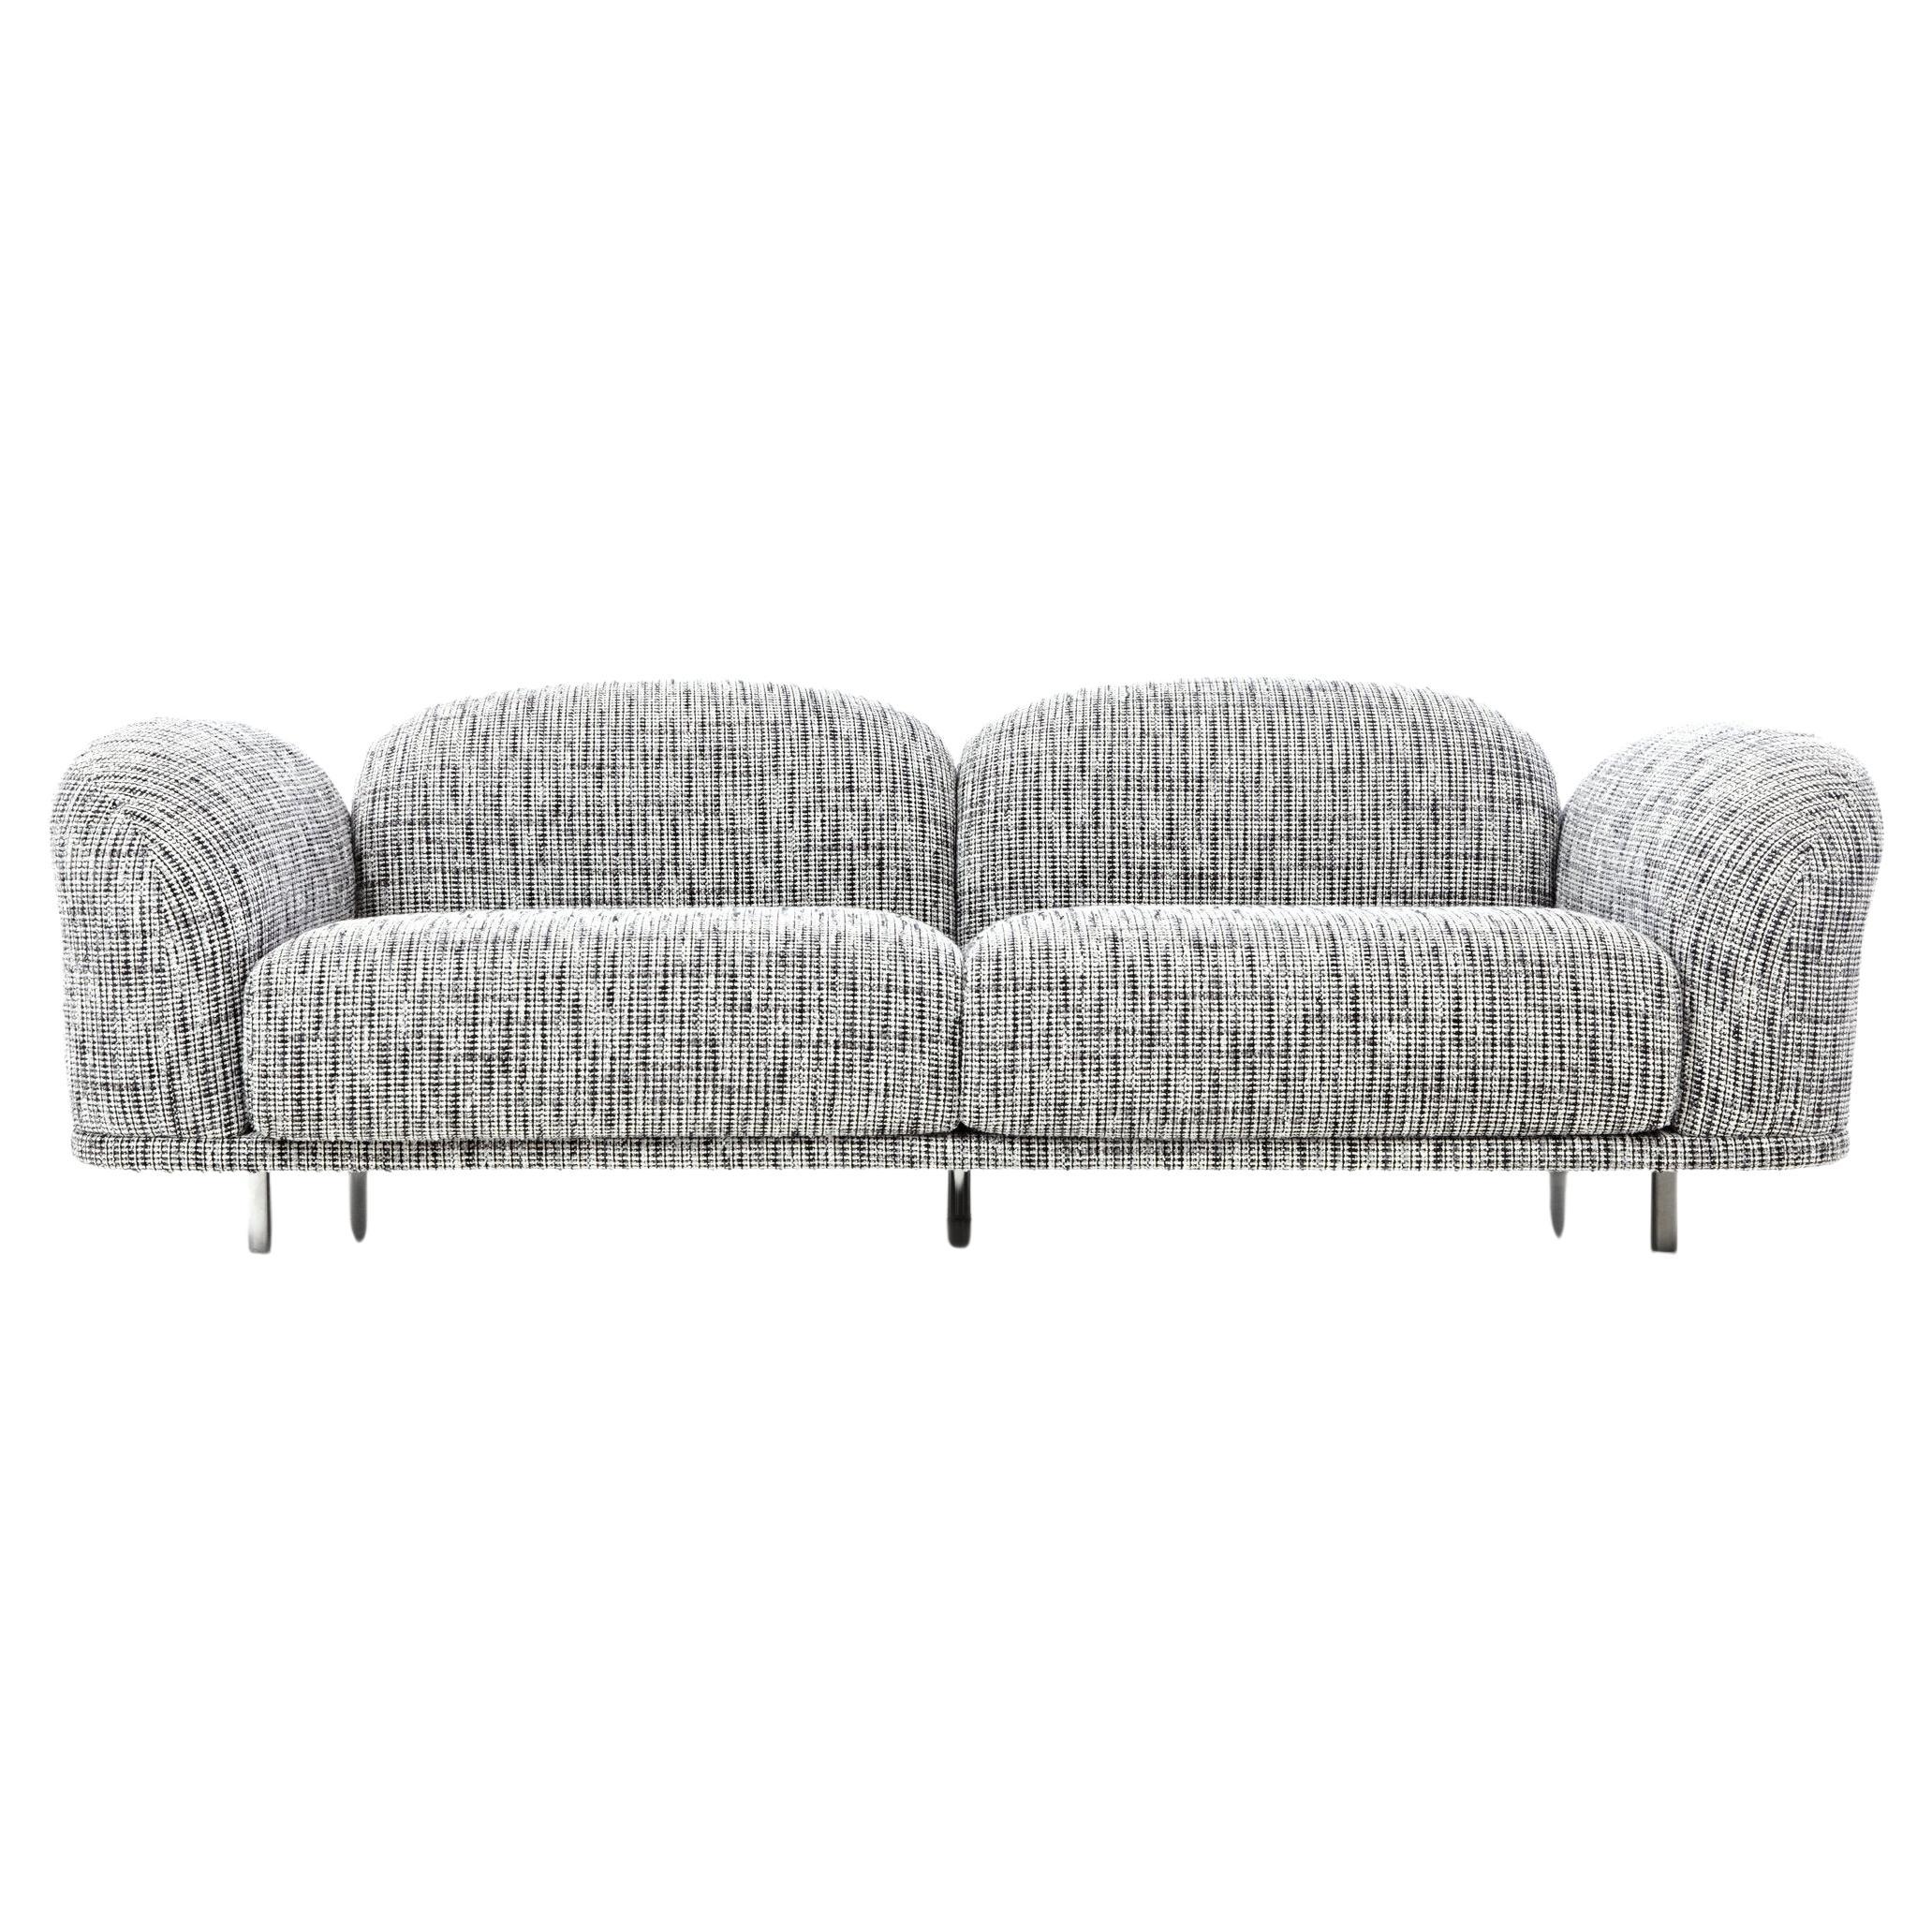 Moooi Cloud Sofa in Steel Frame with Boucle, Black and White Upholstery